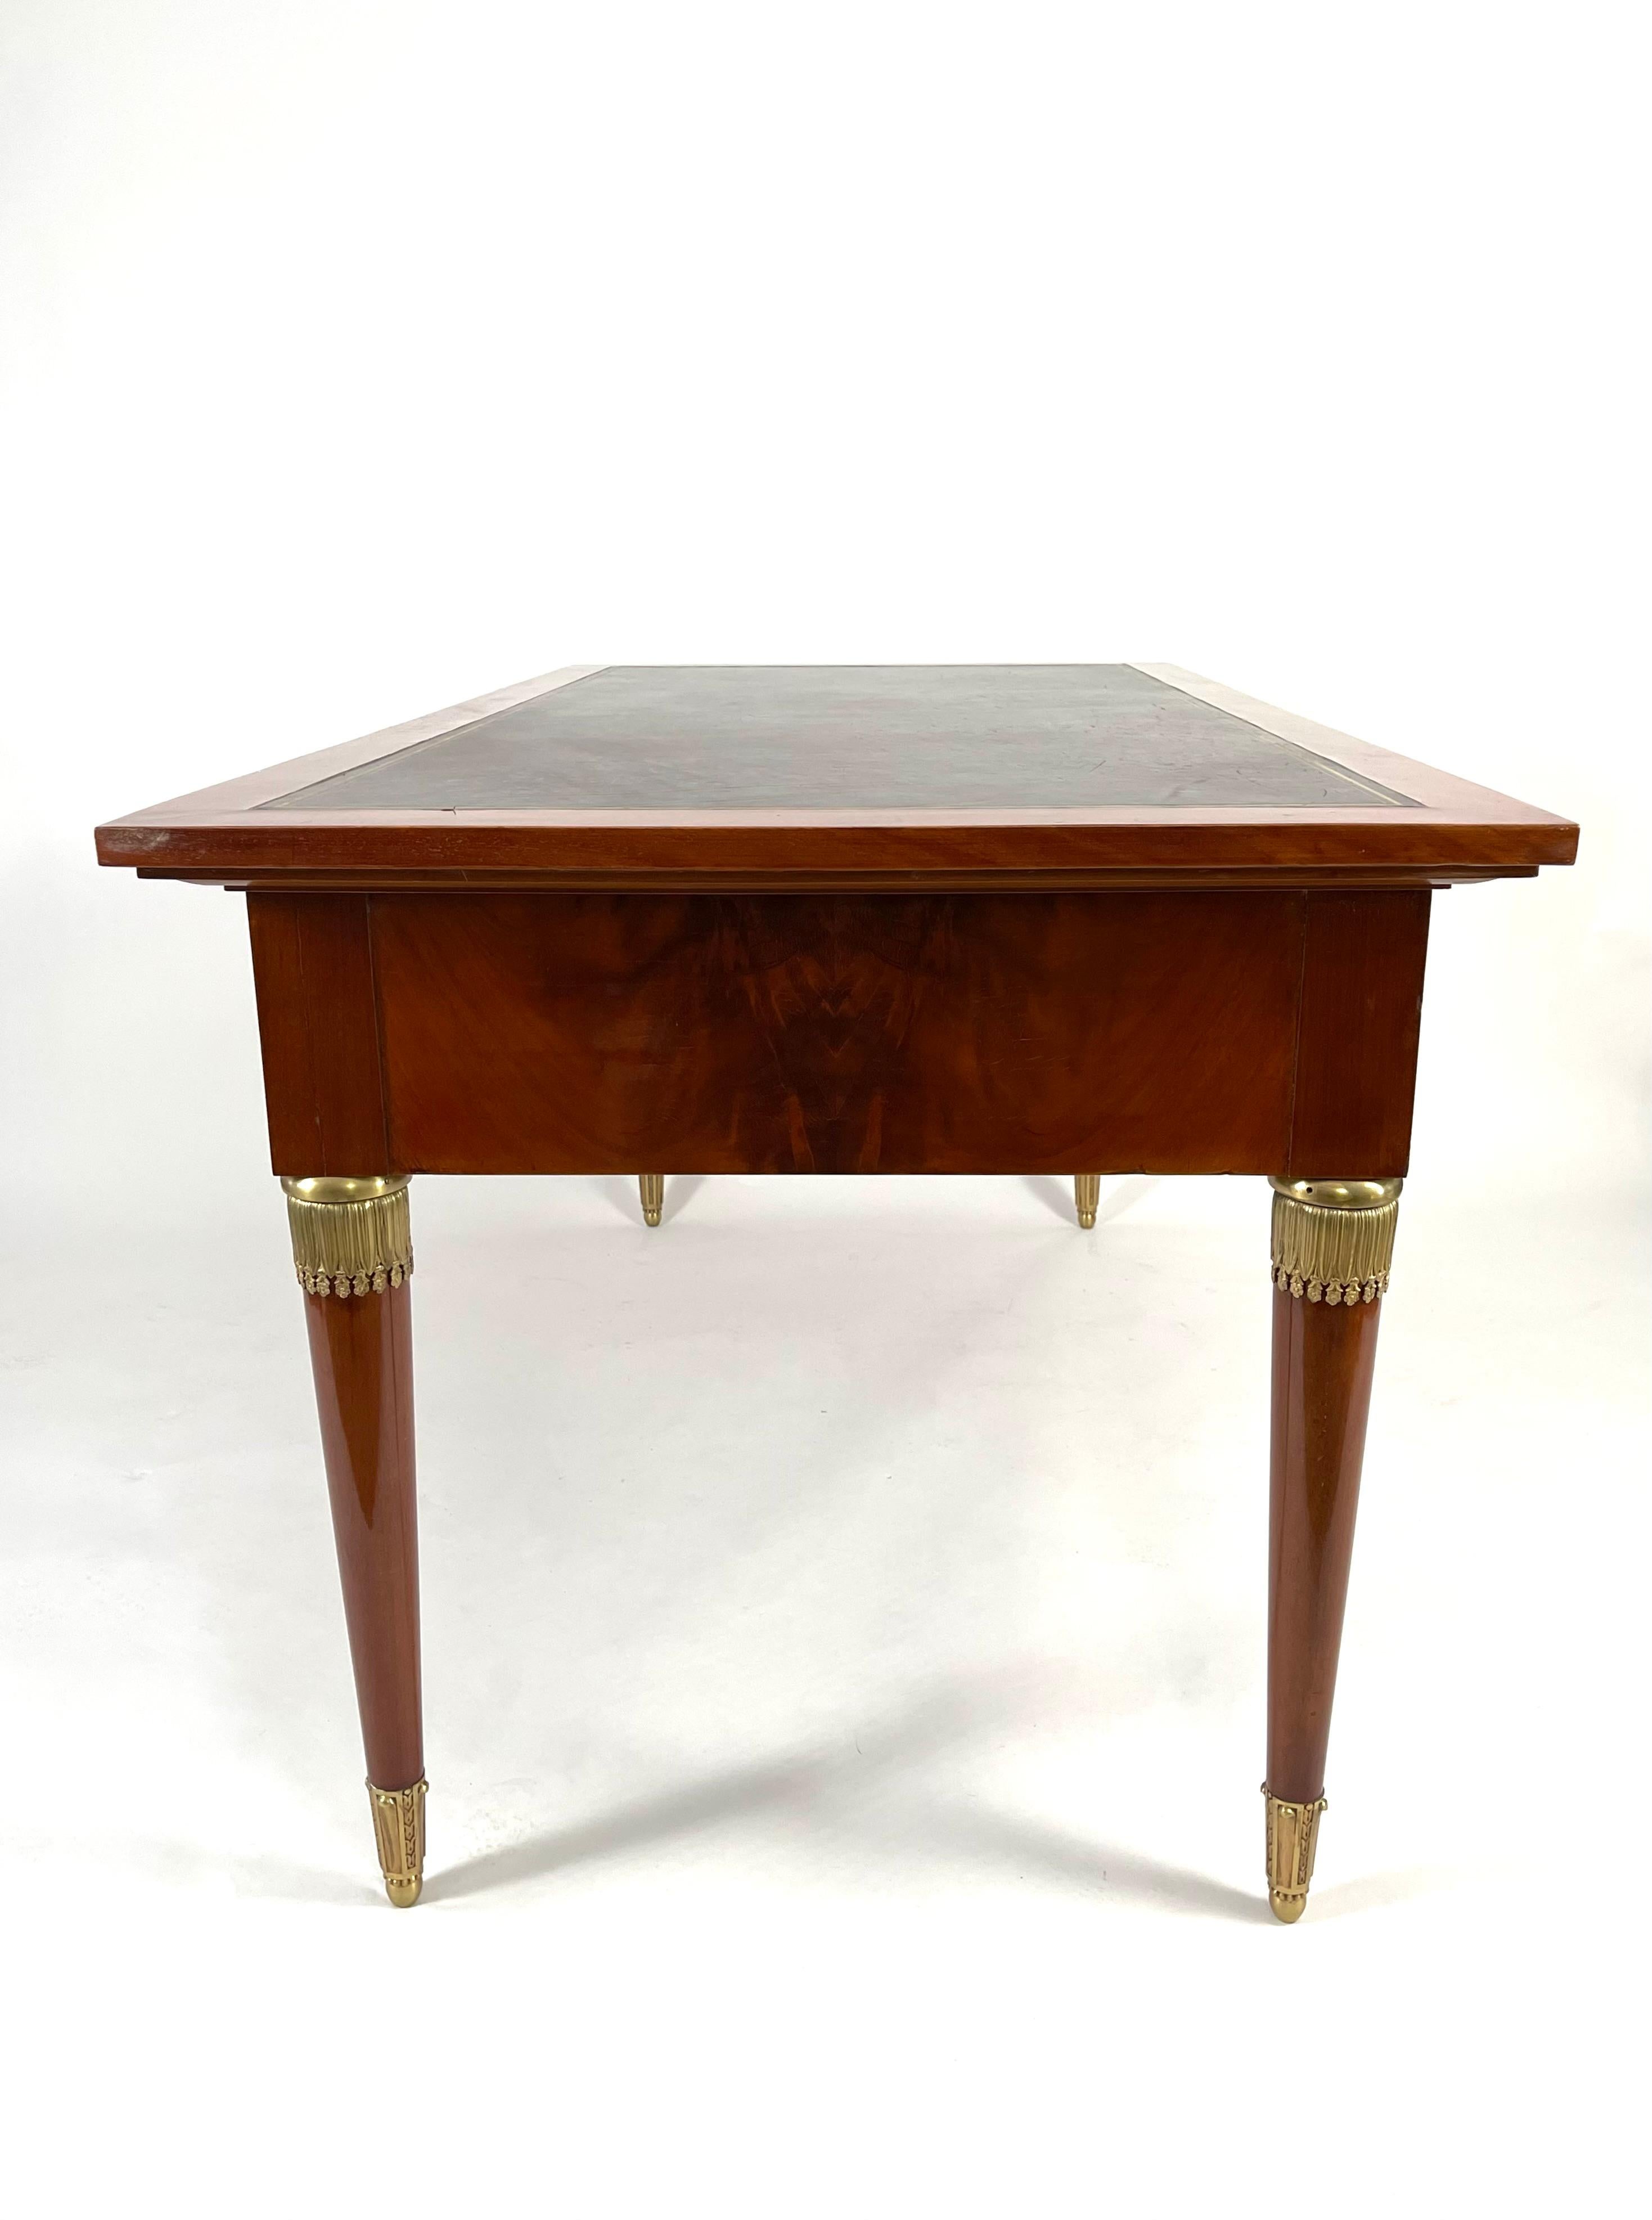 Carved French Neoclassical Empire Style Mahogany Leather Top Desk